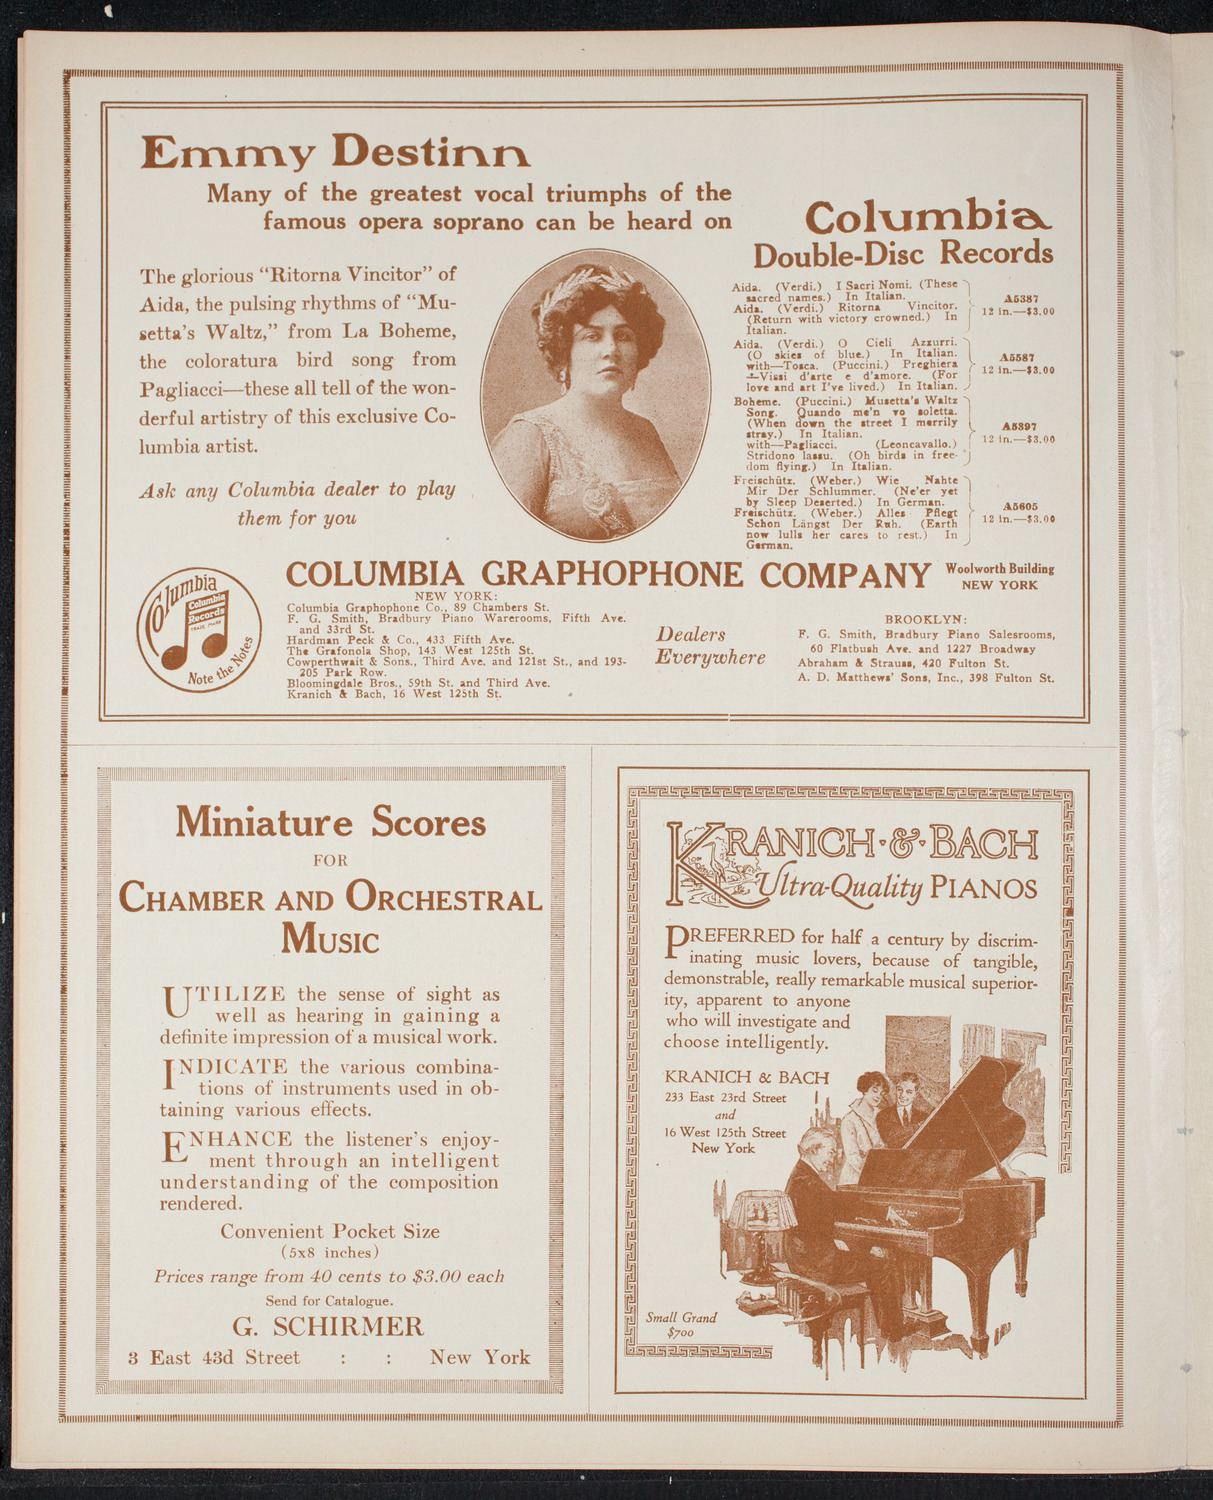 Roy Chandler's South American Series: Spring Byington-Chandler "A Trip to the Argentine", November 25, 1915, program page 6